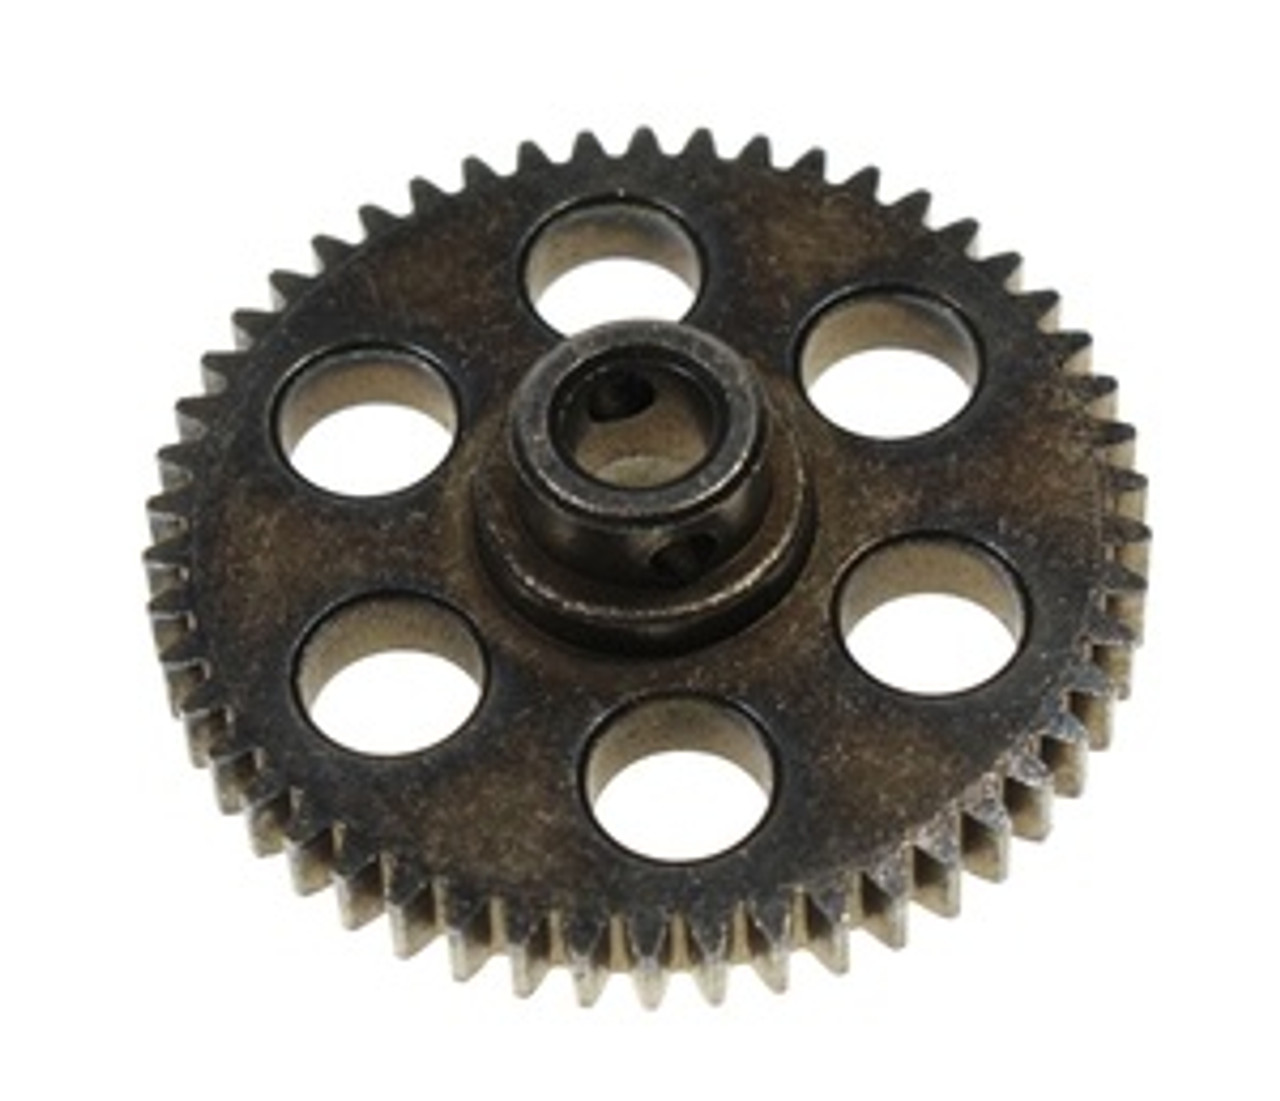 RACERS EDGE Machined Metal Spur Gear for Blackzon Slyder